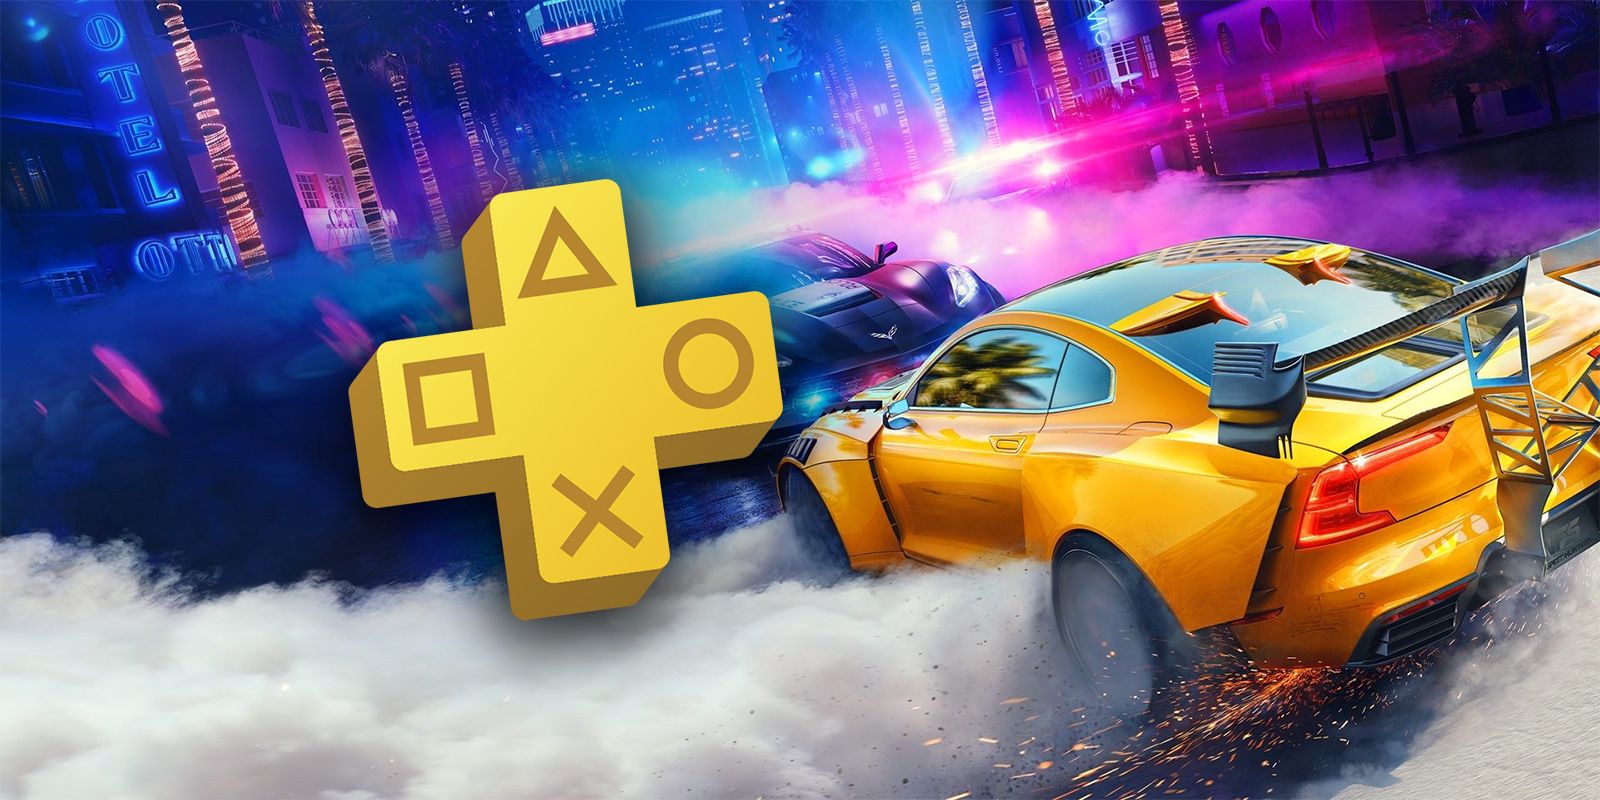 PlayStation on X: The PlayStation Plus Monthly Games and Game Catalog  lineup for September has been revealed. Highlights include Need for Speed  Heat, Toem, Deathloop and Assassin's Creed Origins. Get a preview